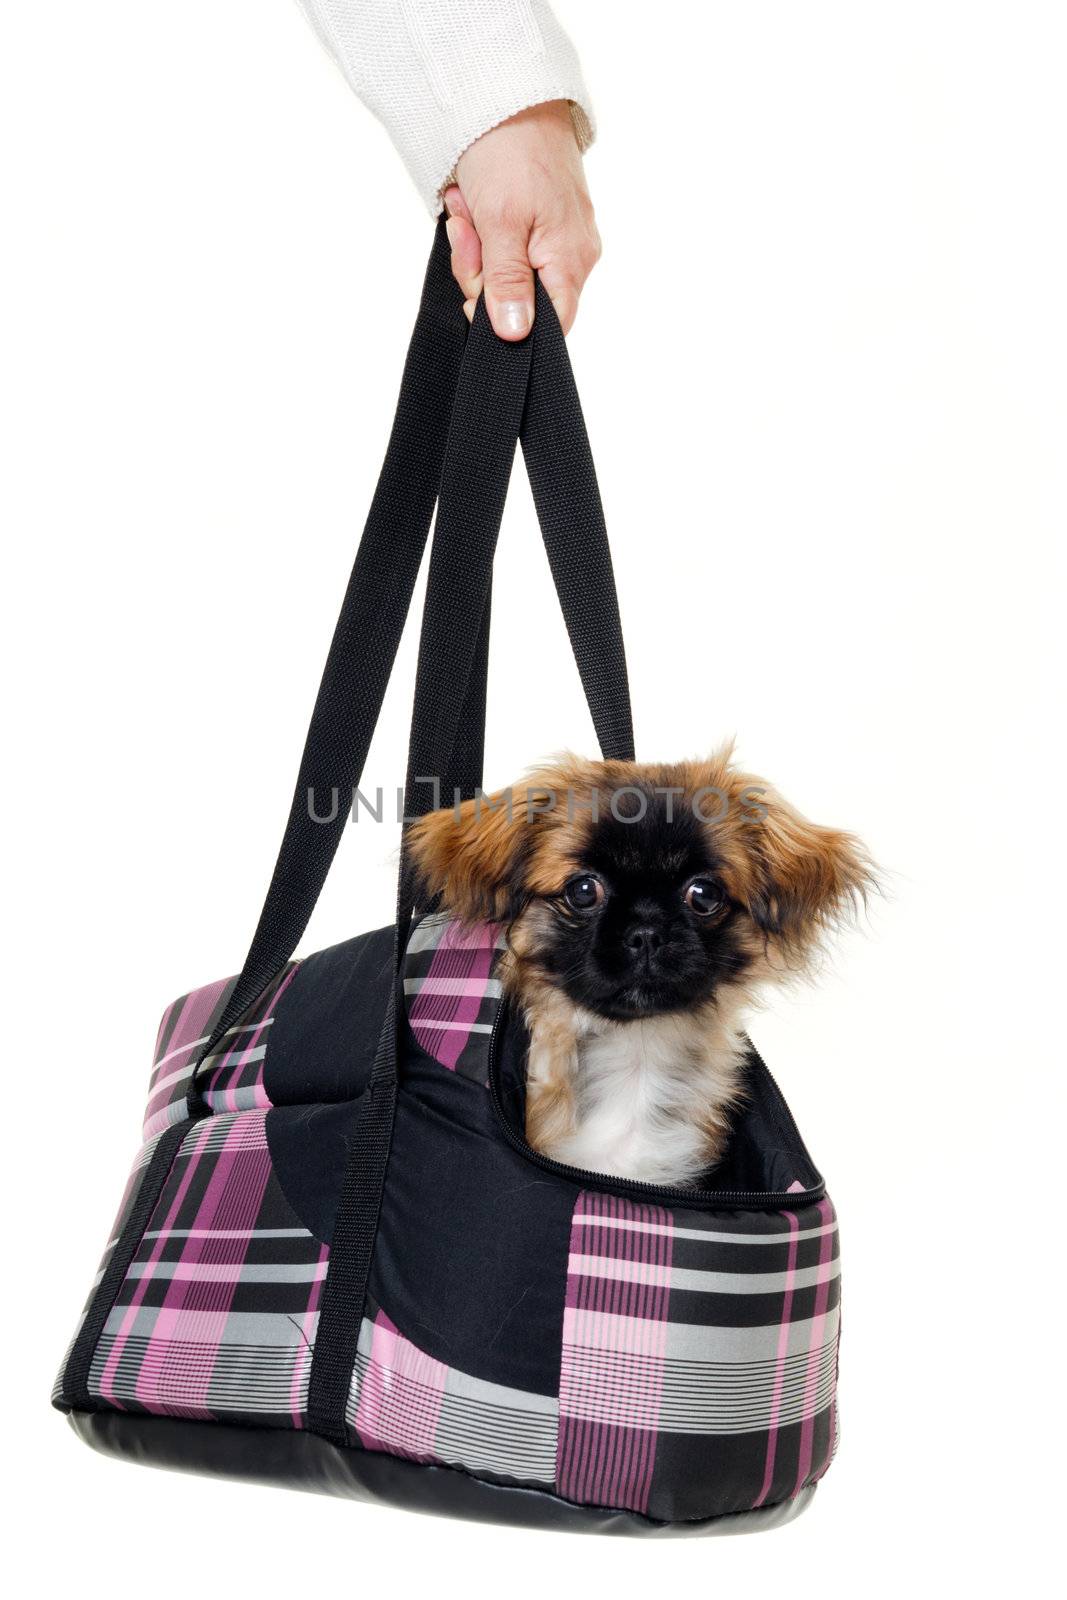 A sweet puppy in transportation bag. Taken on a white background